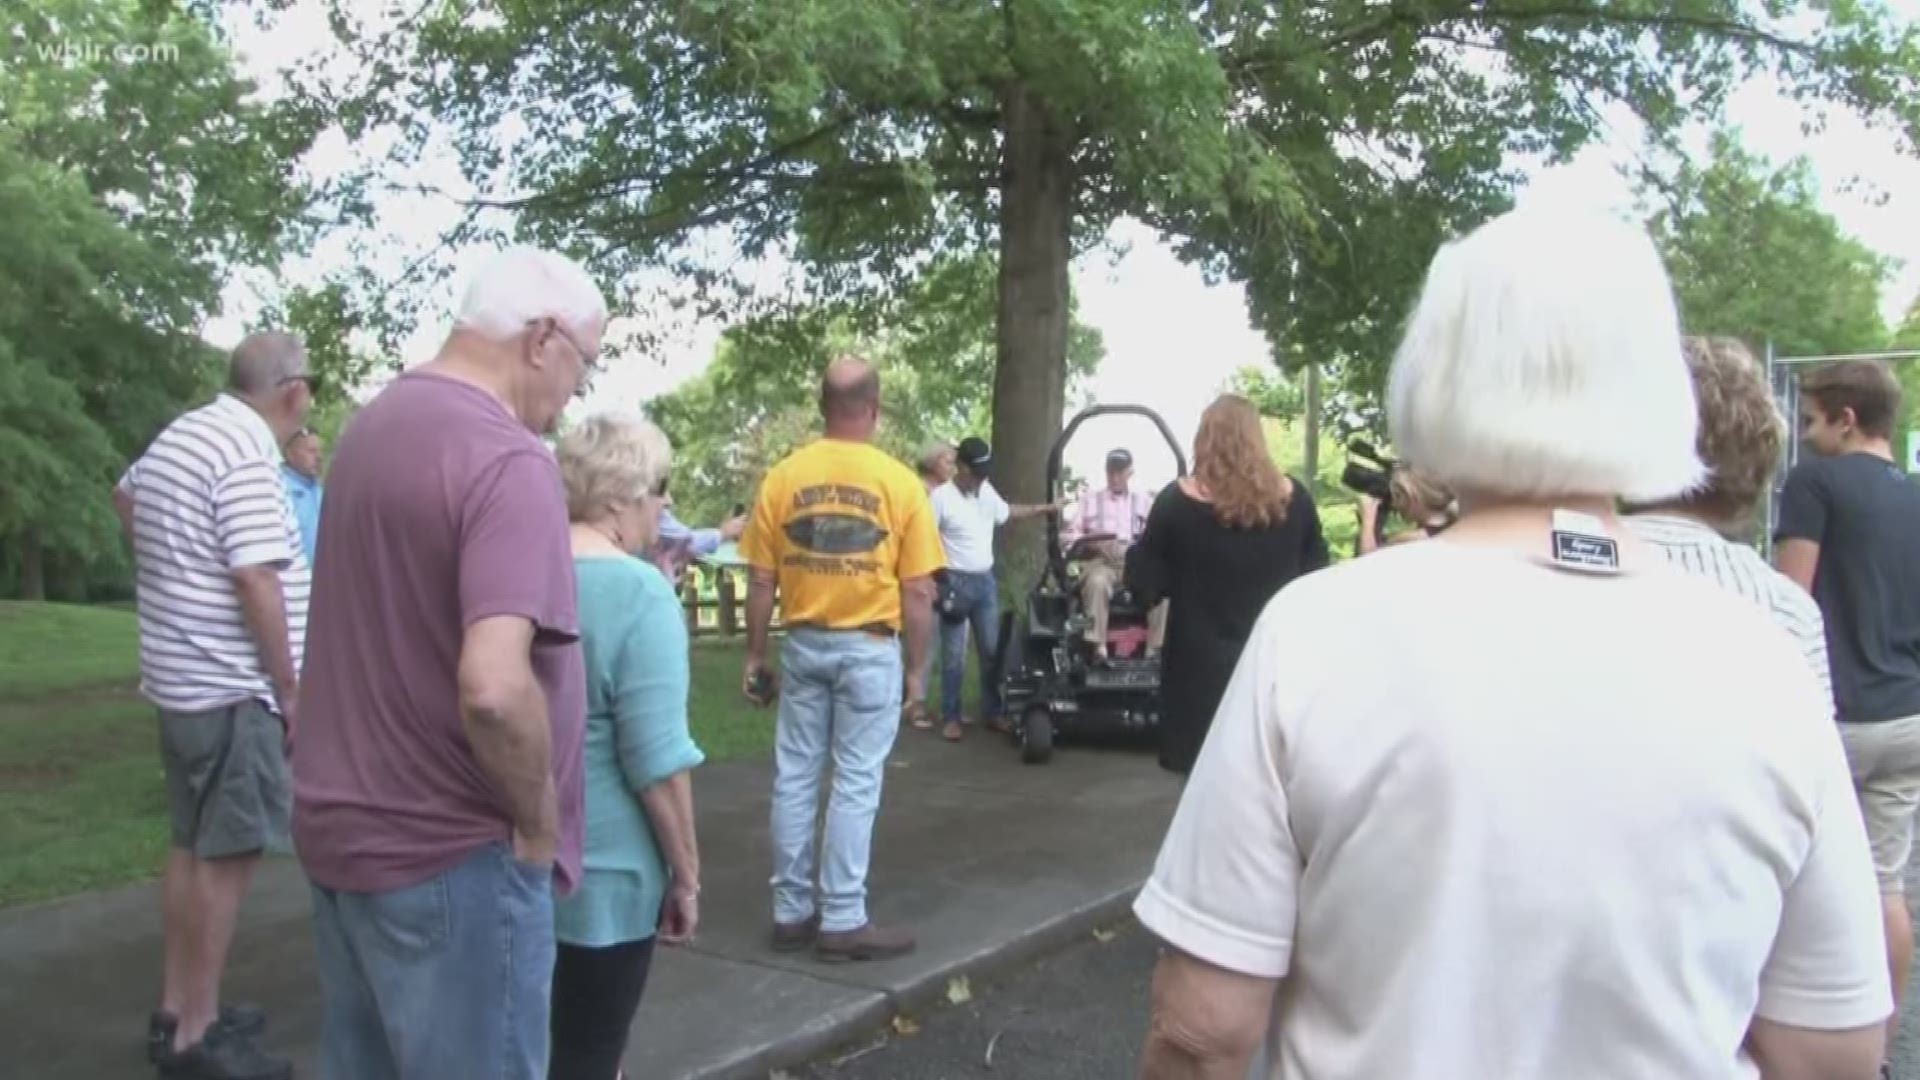 A community came together and raised more than $2,500 to buy 93-year-old PawPaw Patton a new lawn mower after his got stolen.